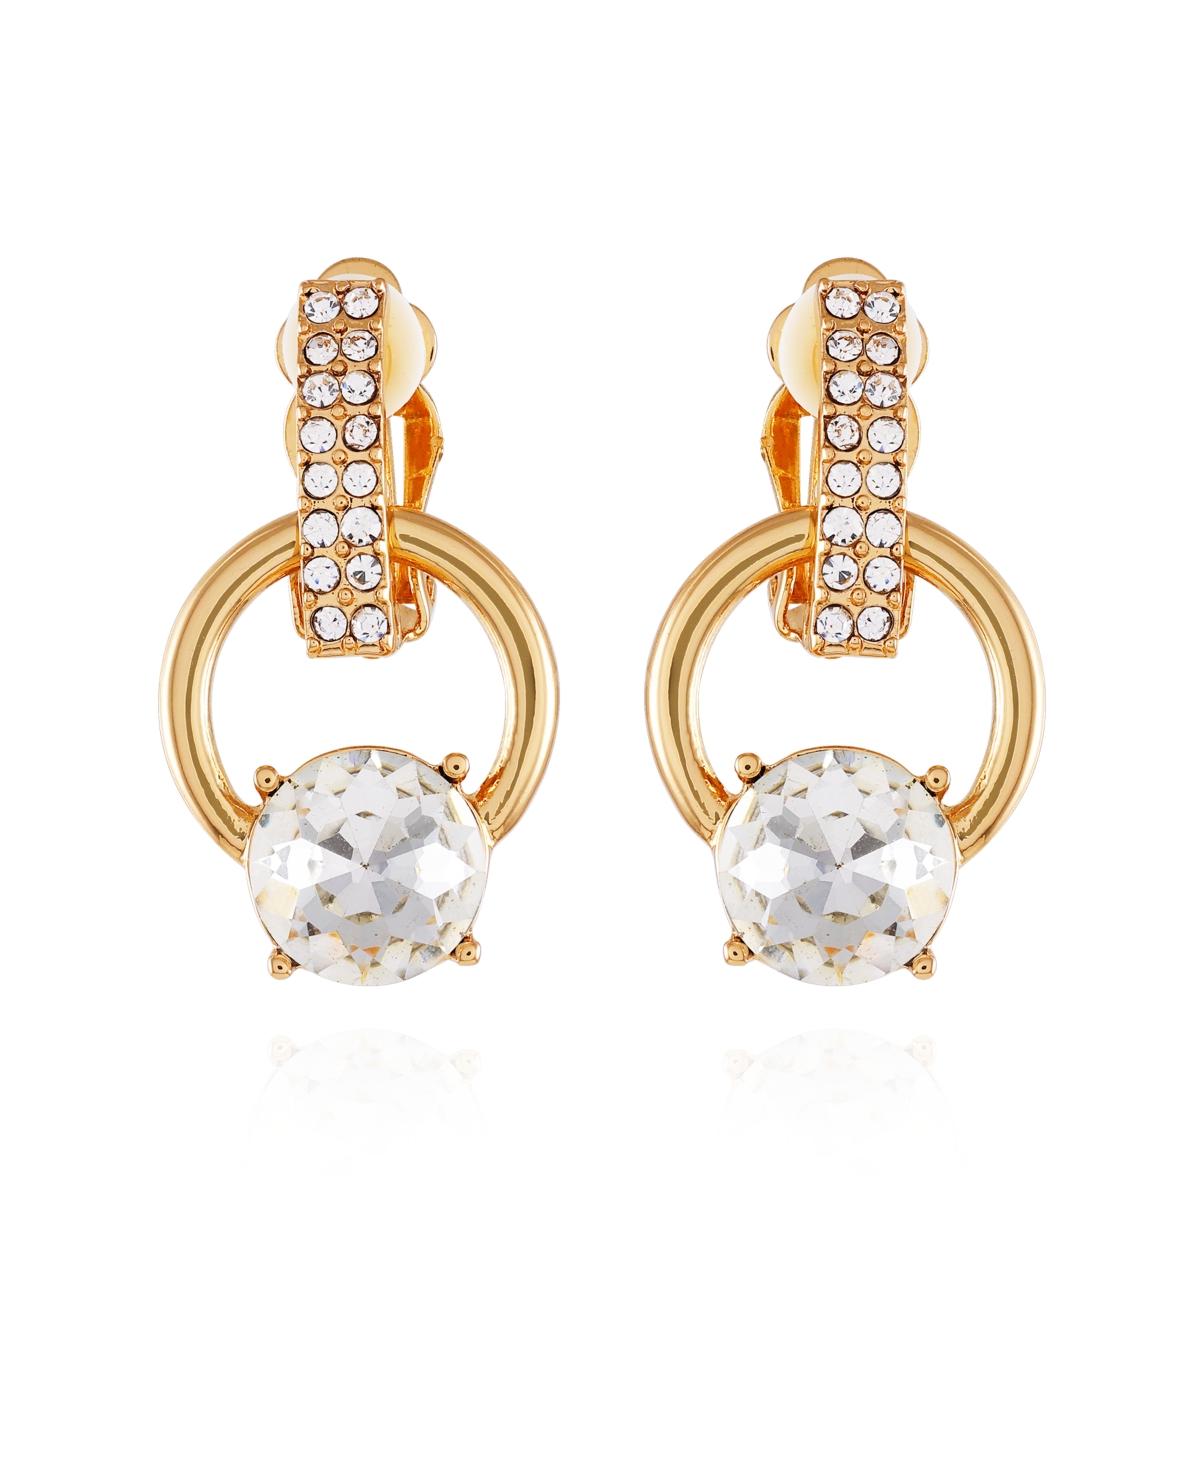 Discover 73+ macy’s clip on earrings super hot